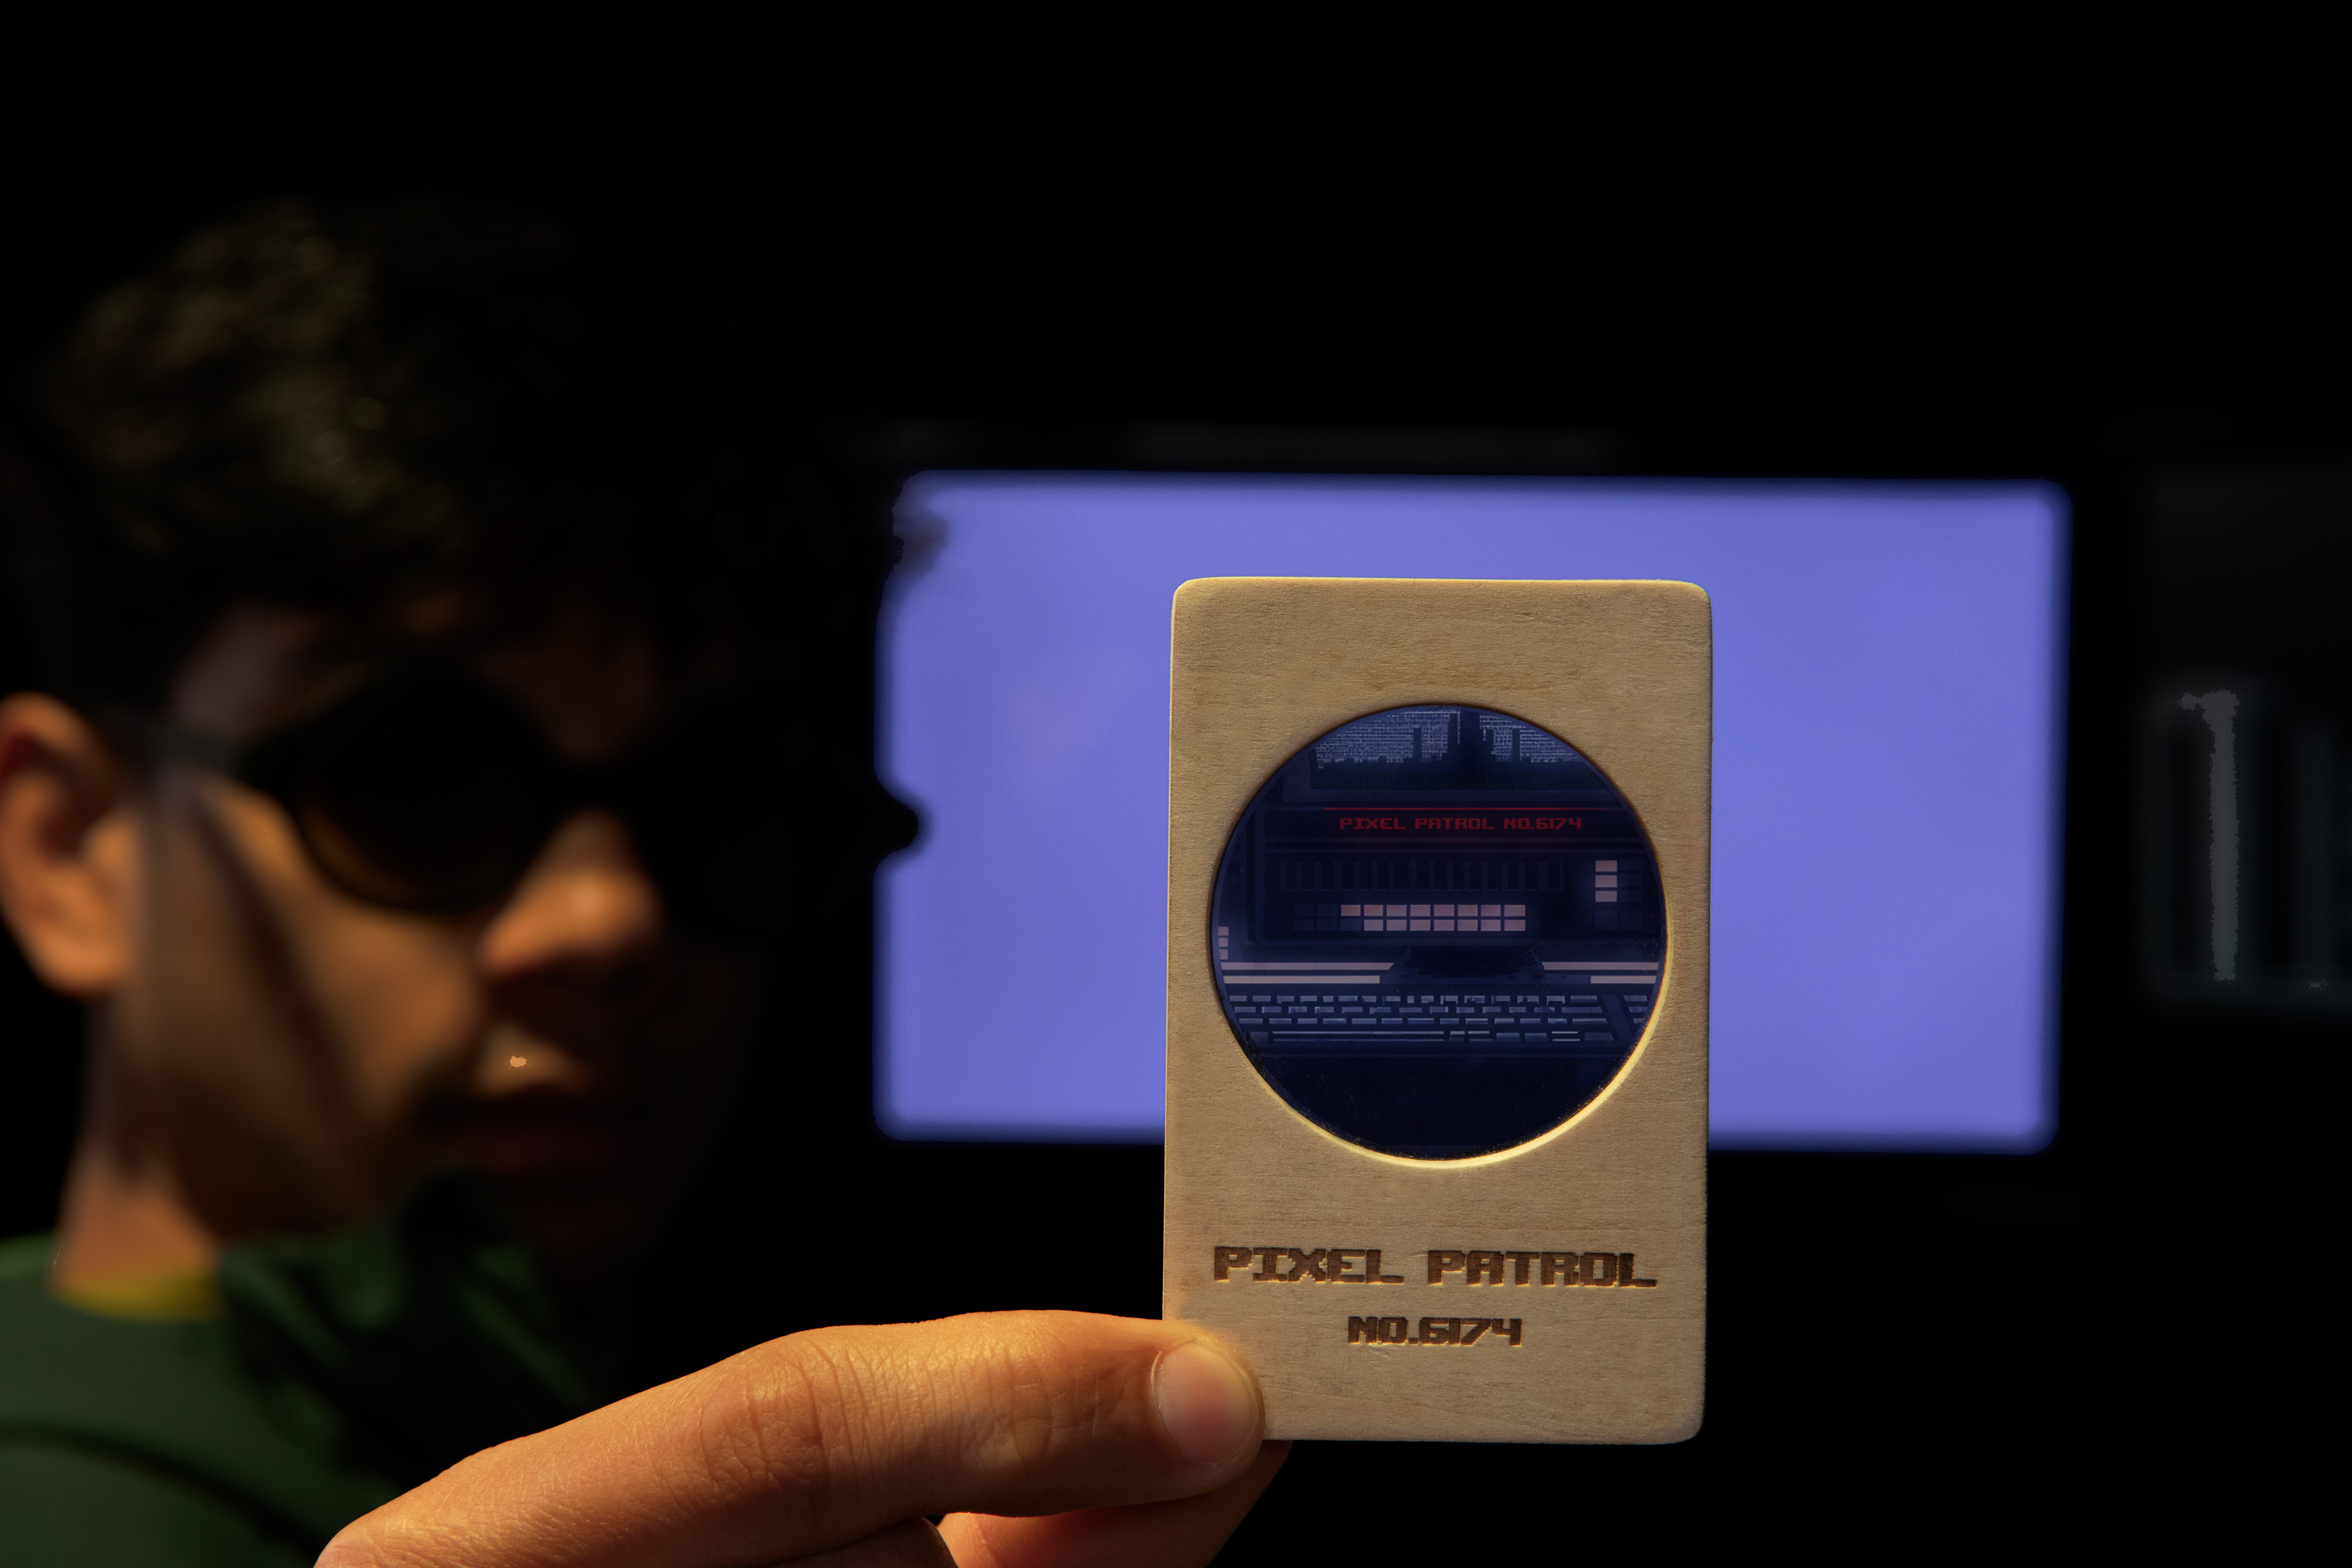 A participant holding a polarizing card up to one of the monitors on the three-monitor setup in Pixel Patrol. The polarizing card is used to reveal hidden content and enable the participant to view the screens.